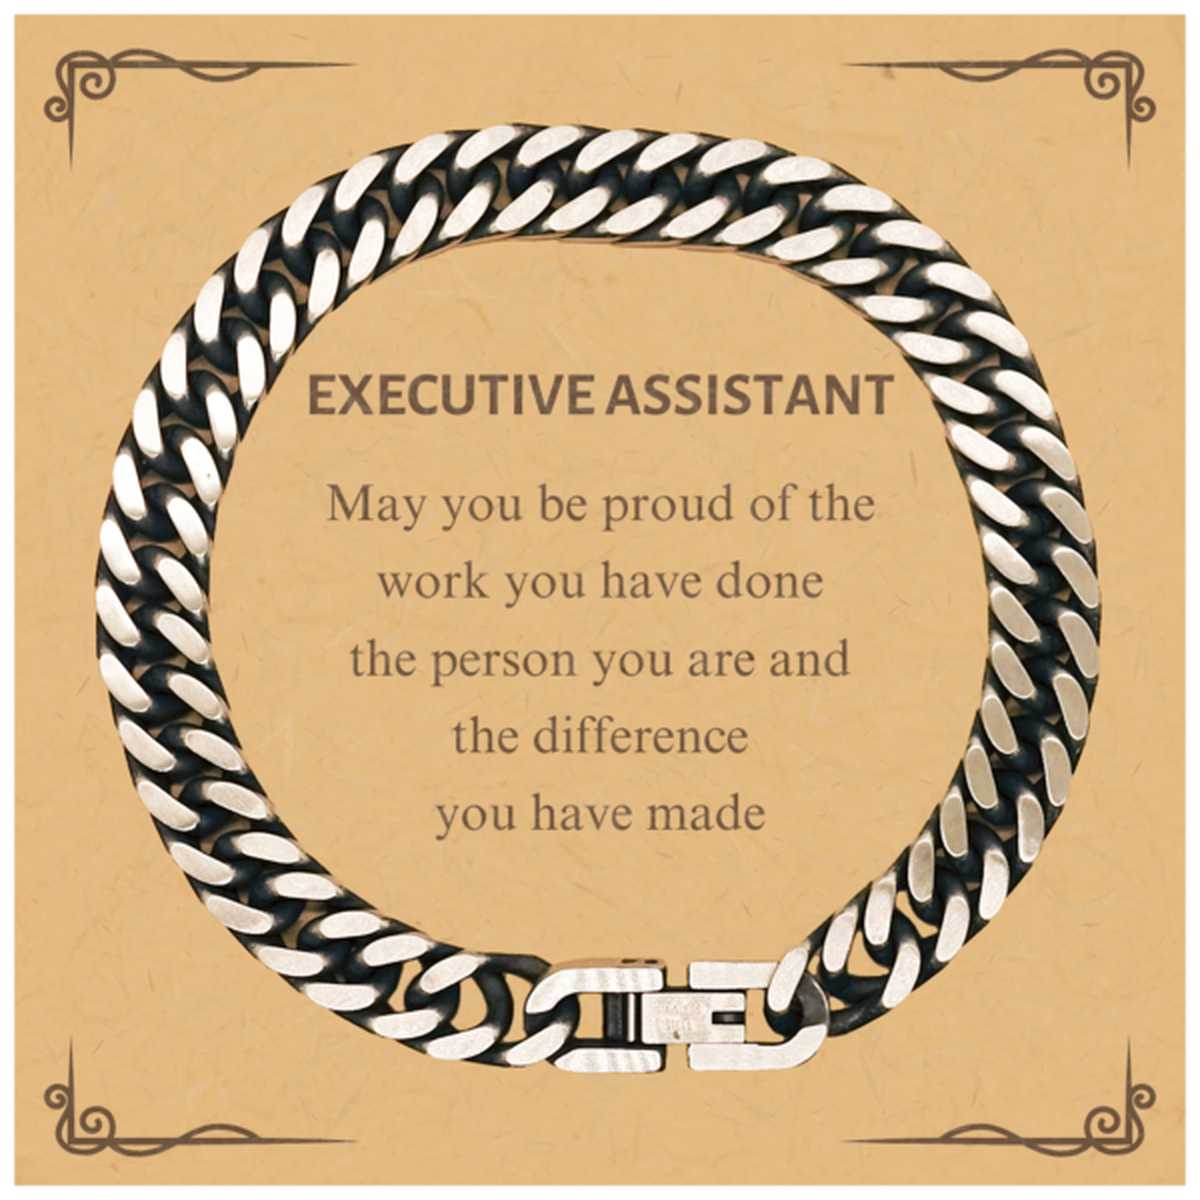 Executive Assistant May you be proud of the work you have done, Retirement Executive Assistant Cuban Link Chain Bracelet for Colleague Appreciation Gifts Amazing for Executive Assistant